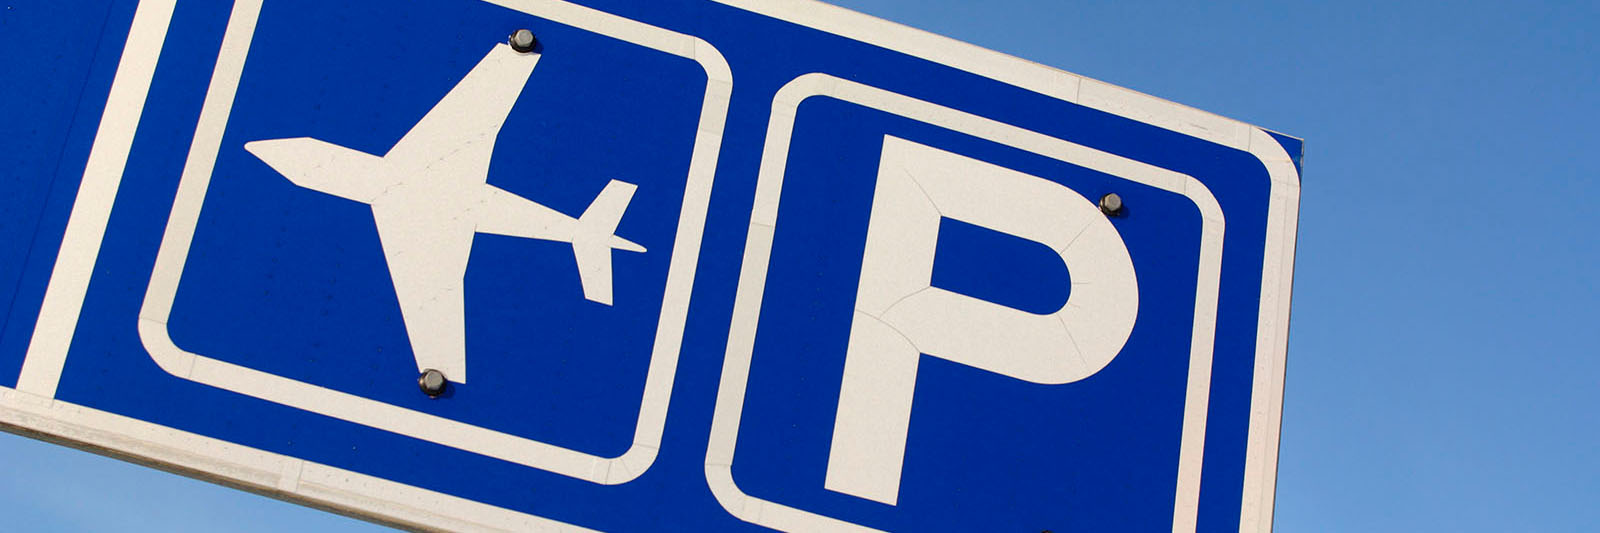 sign-depicting-airport-parking_web_1600x533